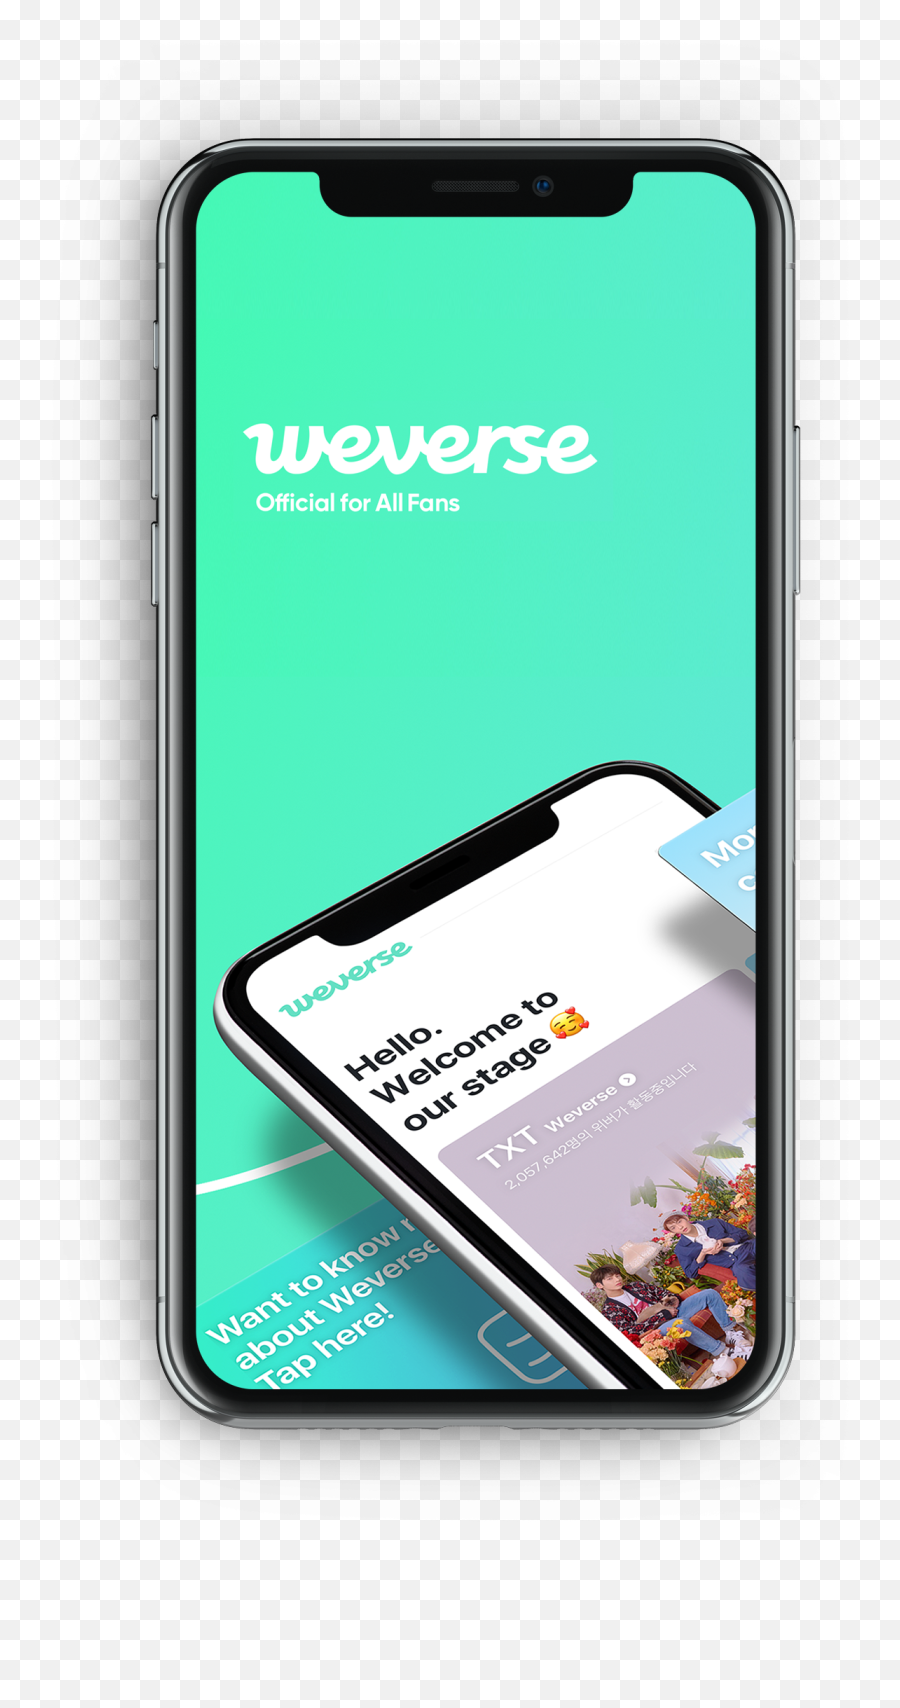 Weverse - Get Together With Artists And Other Fans To Create Emoji,How To Do Emojis On Galaxy S3